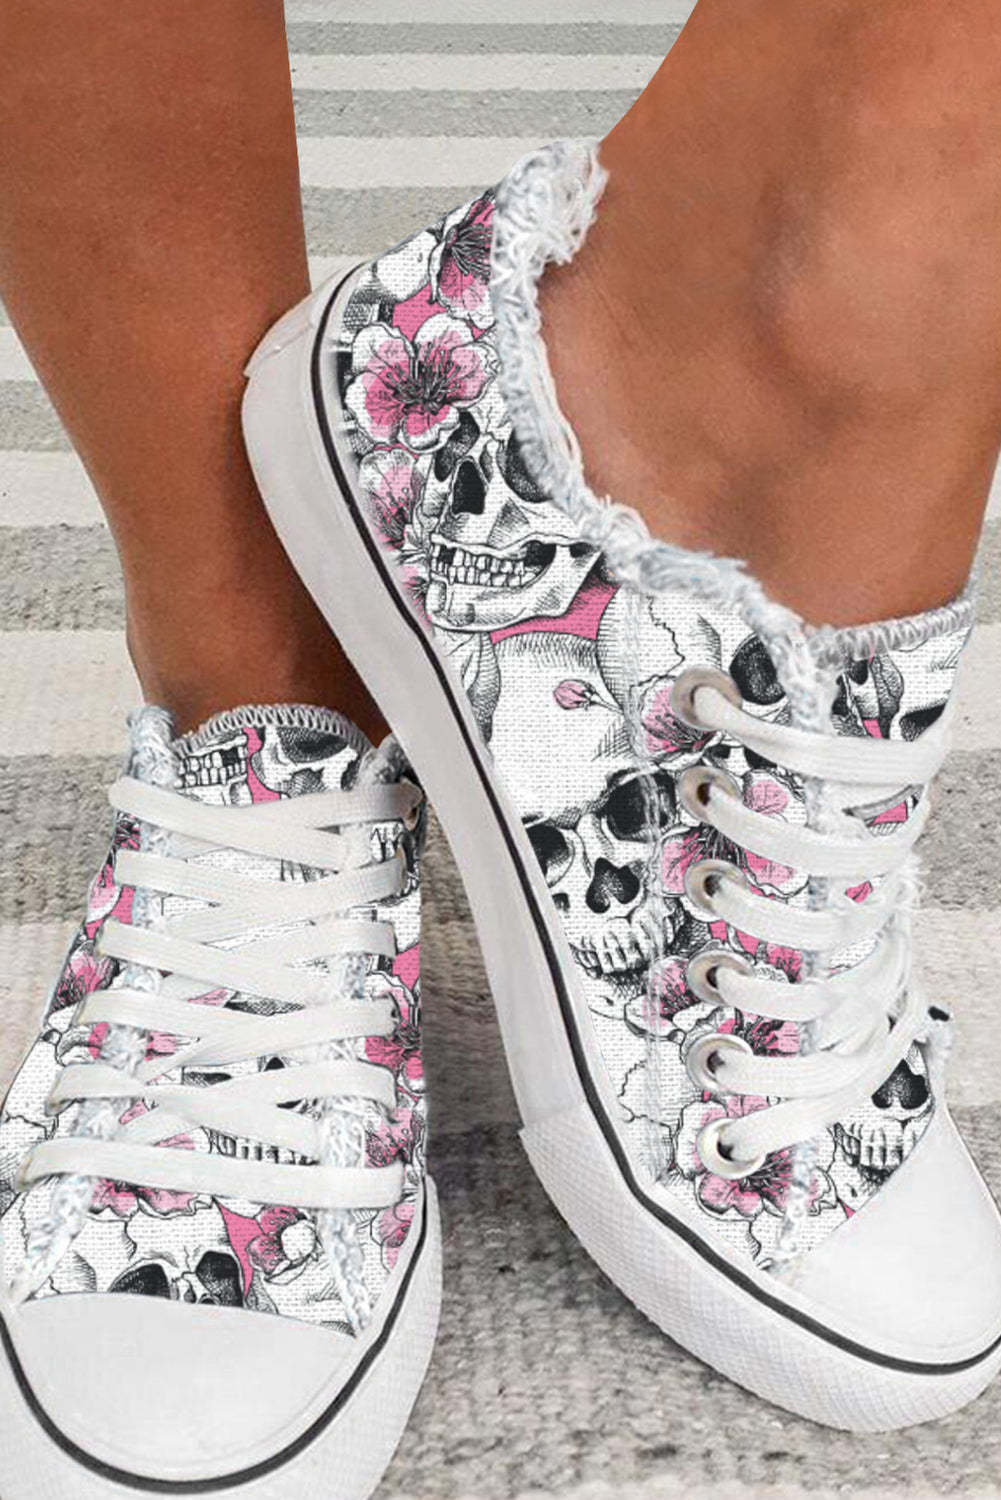 SKULL FLORAL DAILY CASUAL FLATS CANVAS SHOES